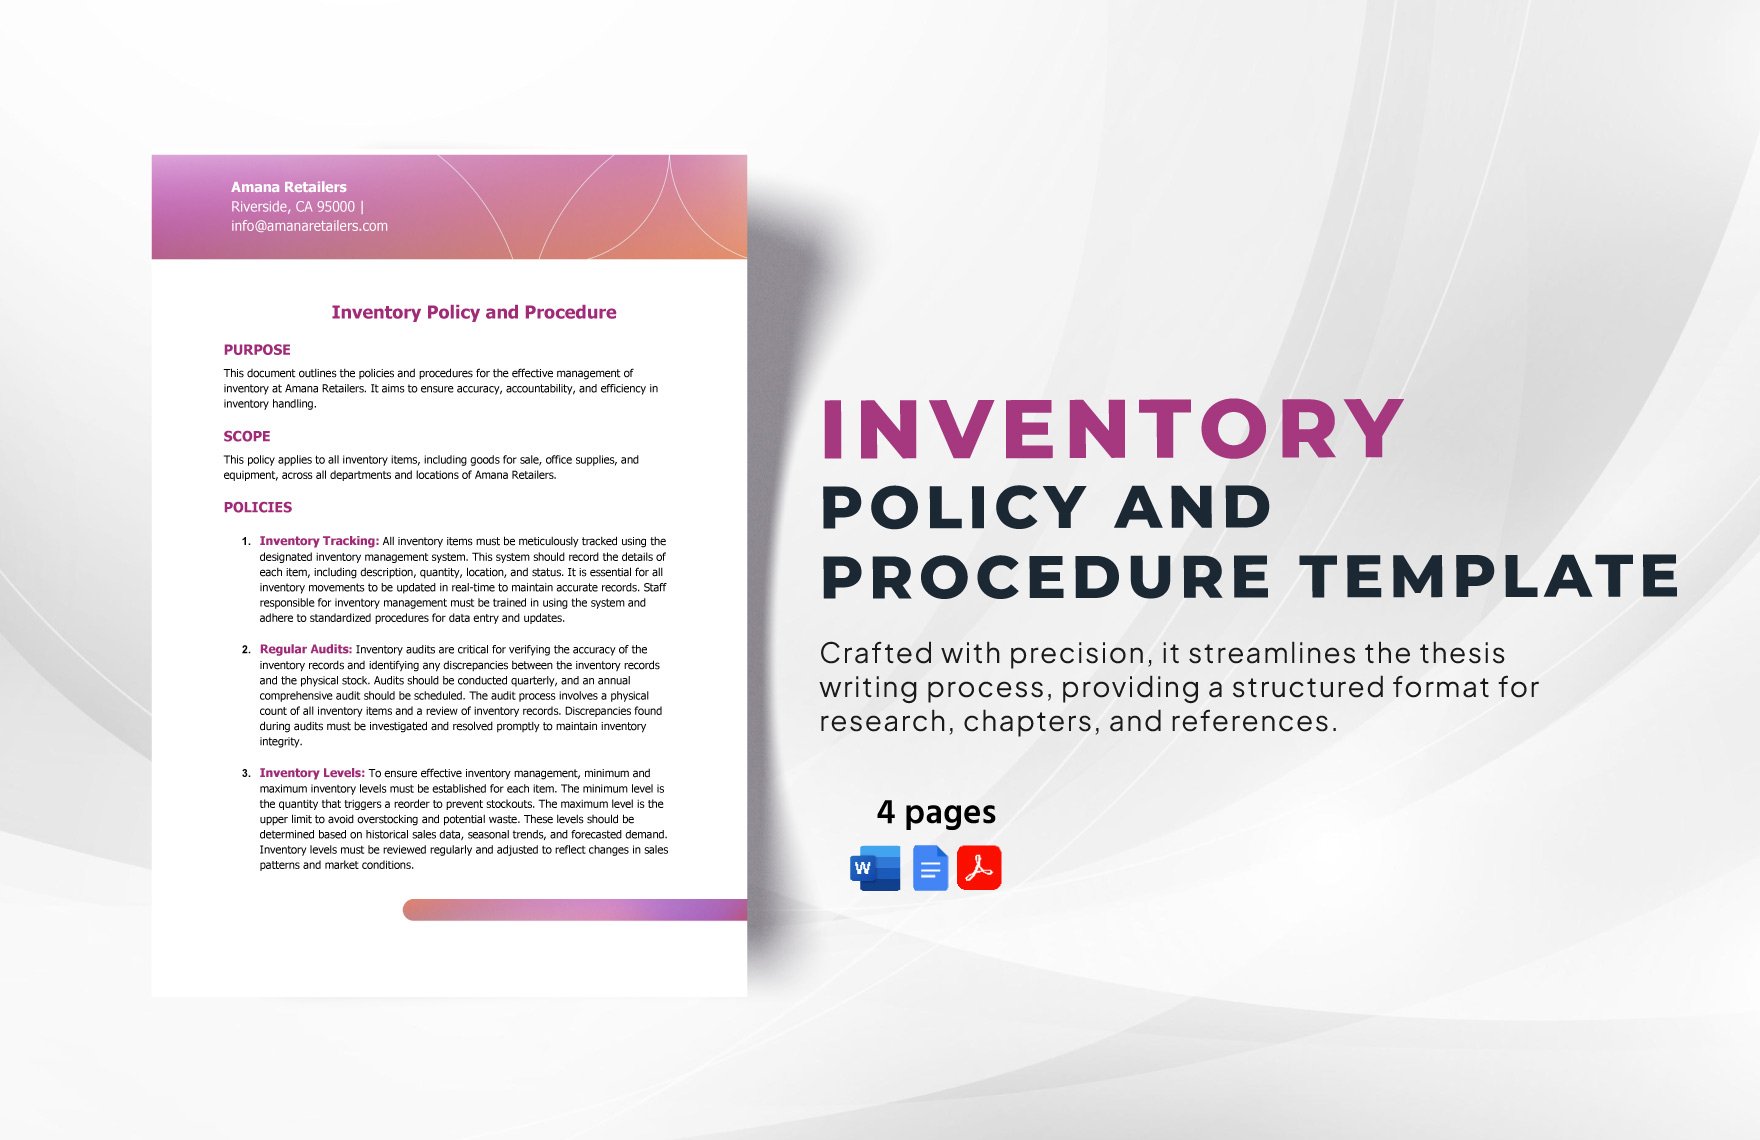 Inventory Policy and Procedure Template